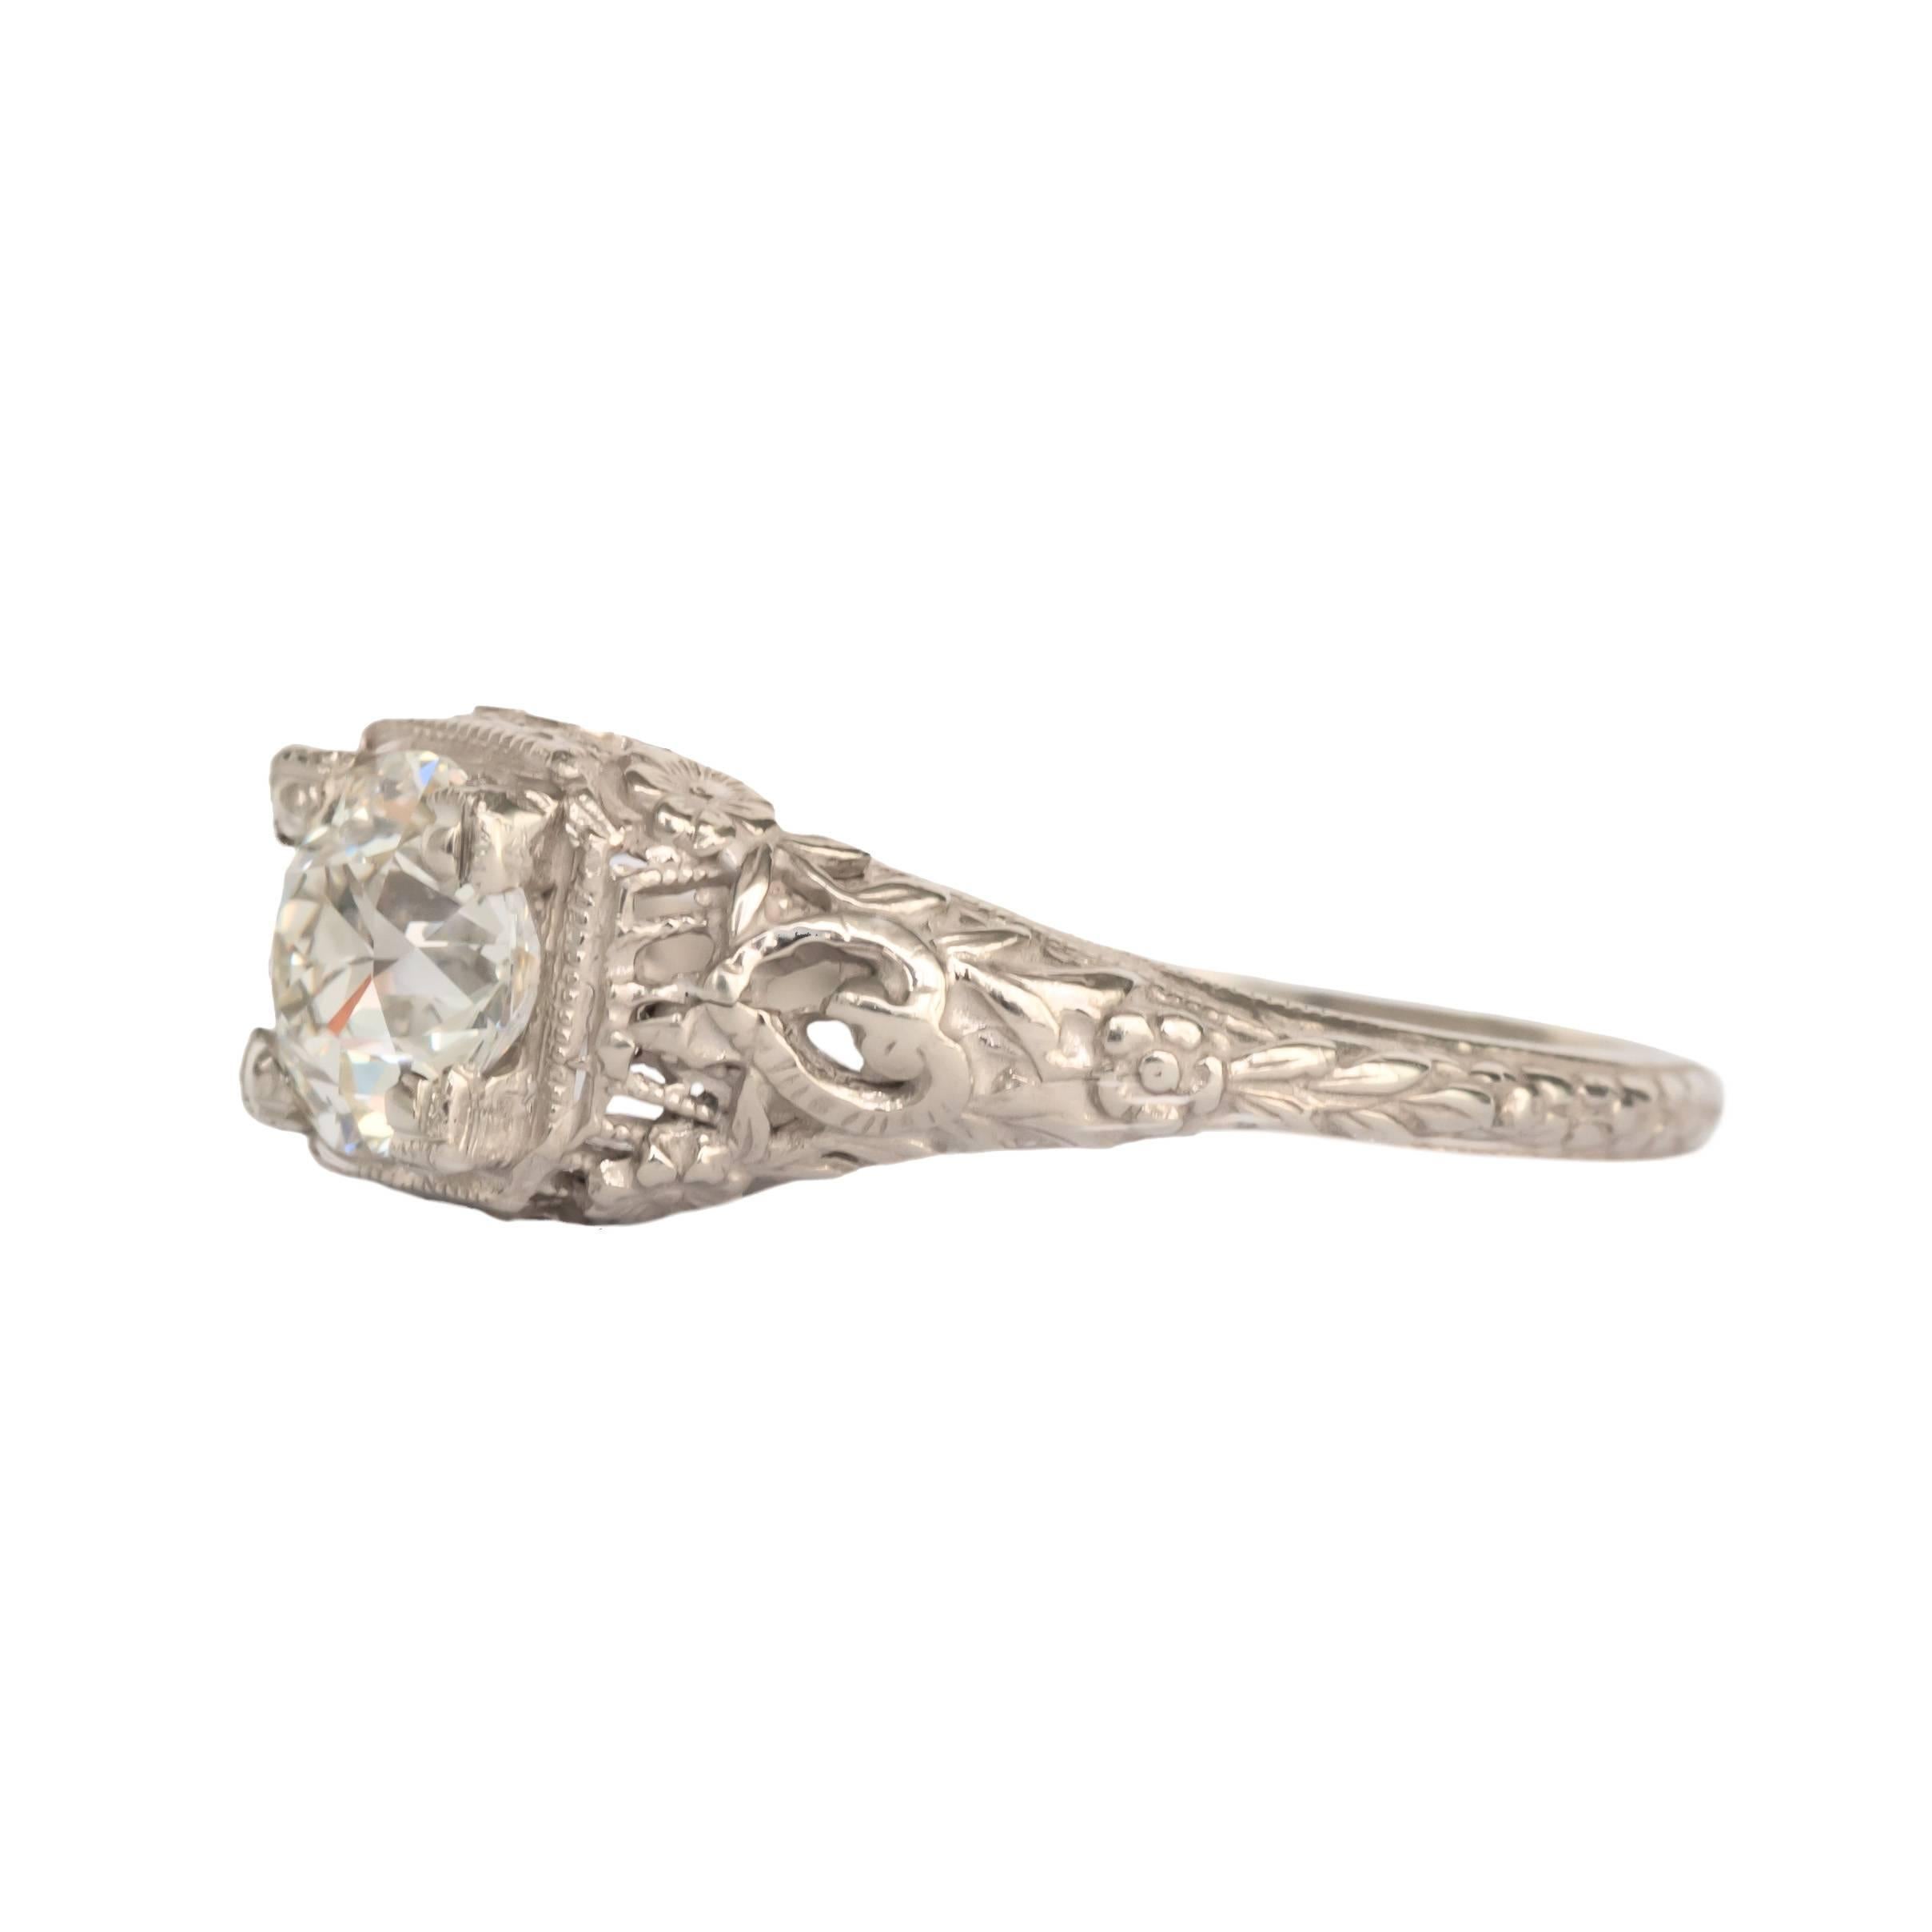 Item Details: 
Ring Size: 6.5
Metal Type: 14 Karat White Gold 
Weight: 2.0 grams

Center Diamond Details
Shape: Old European Brilliant 
Carat Weight: .85 carat
Color: J
Clarity: VS1

Finger to Top of Stone Measurement: 6.64mm